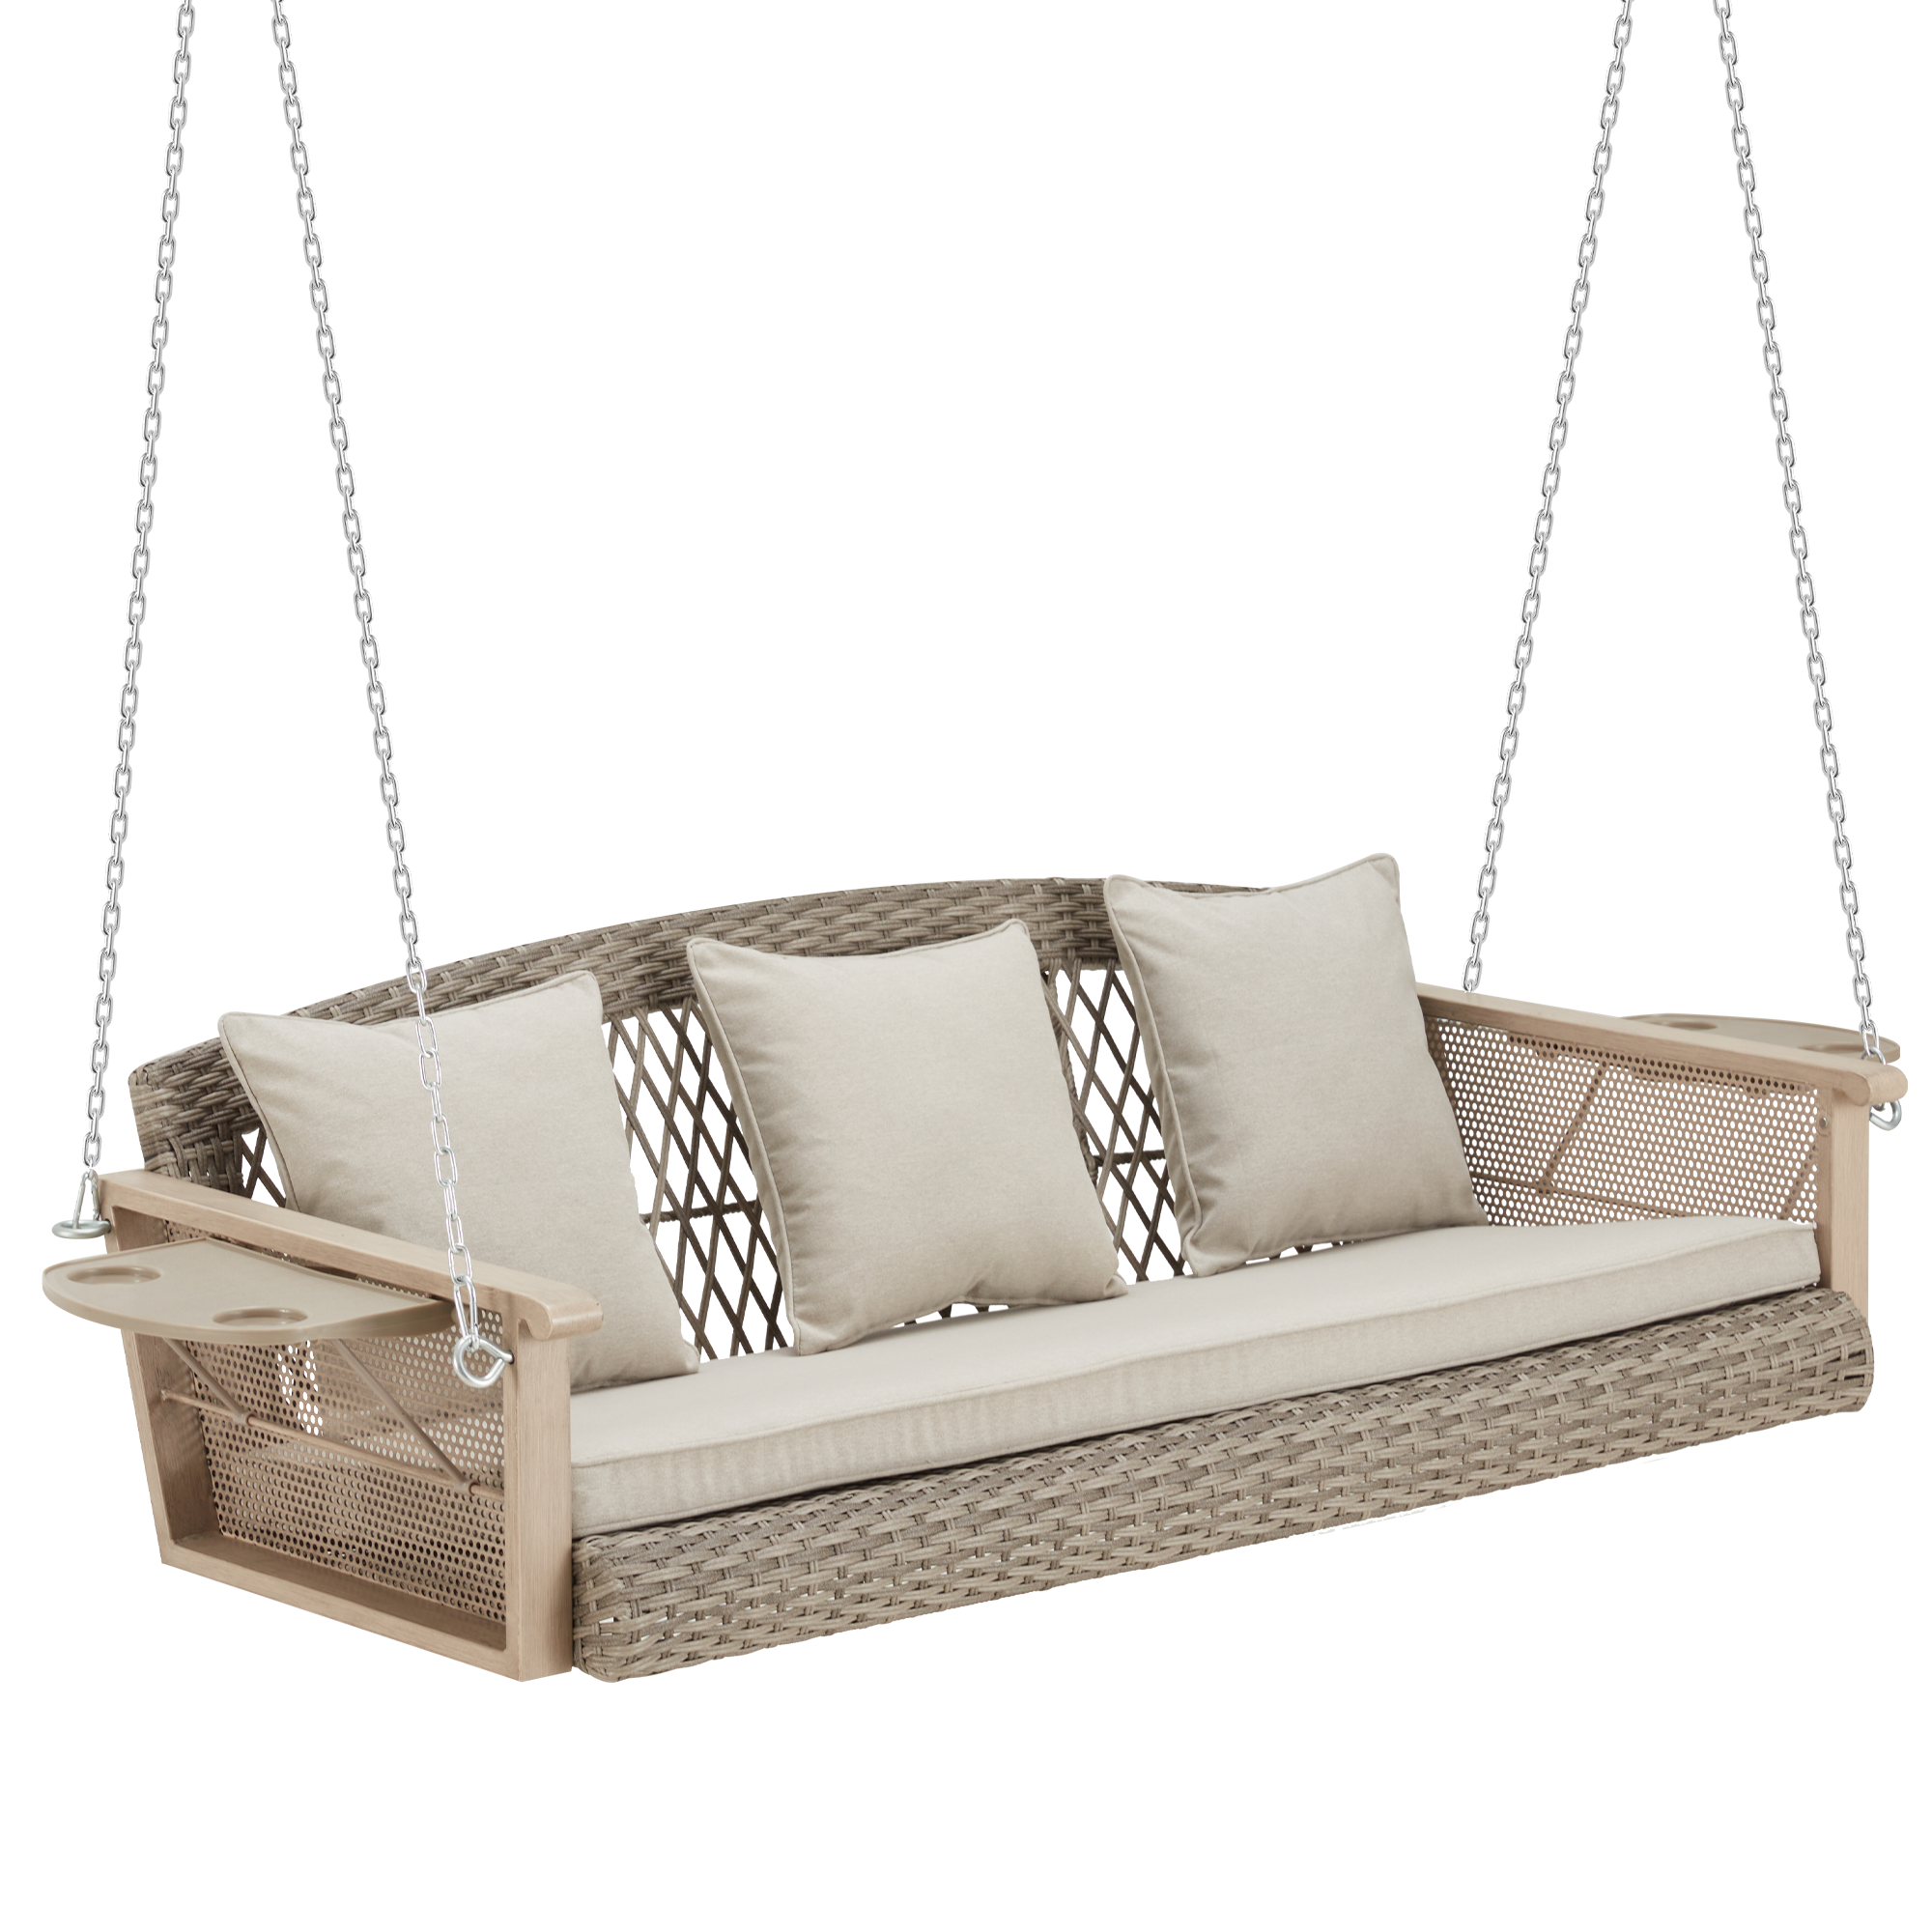 homrest-3-person-porch-swing-55in-wicker-hanging-swing-bench-with-cushions-cupholders-for-deck-garden-backyard